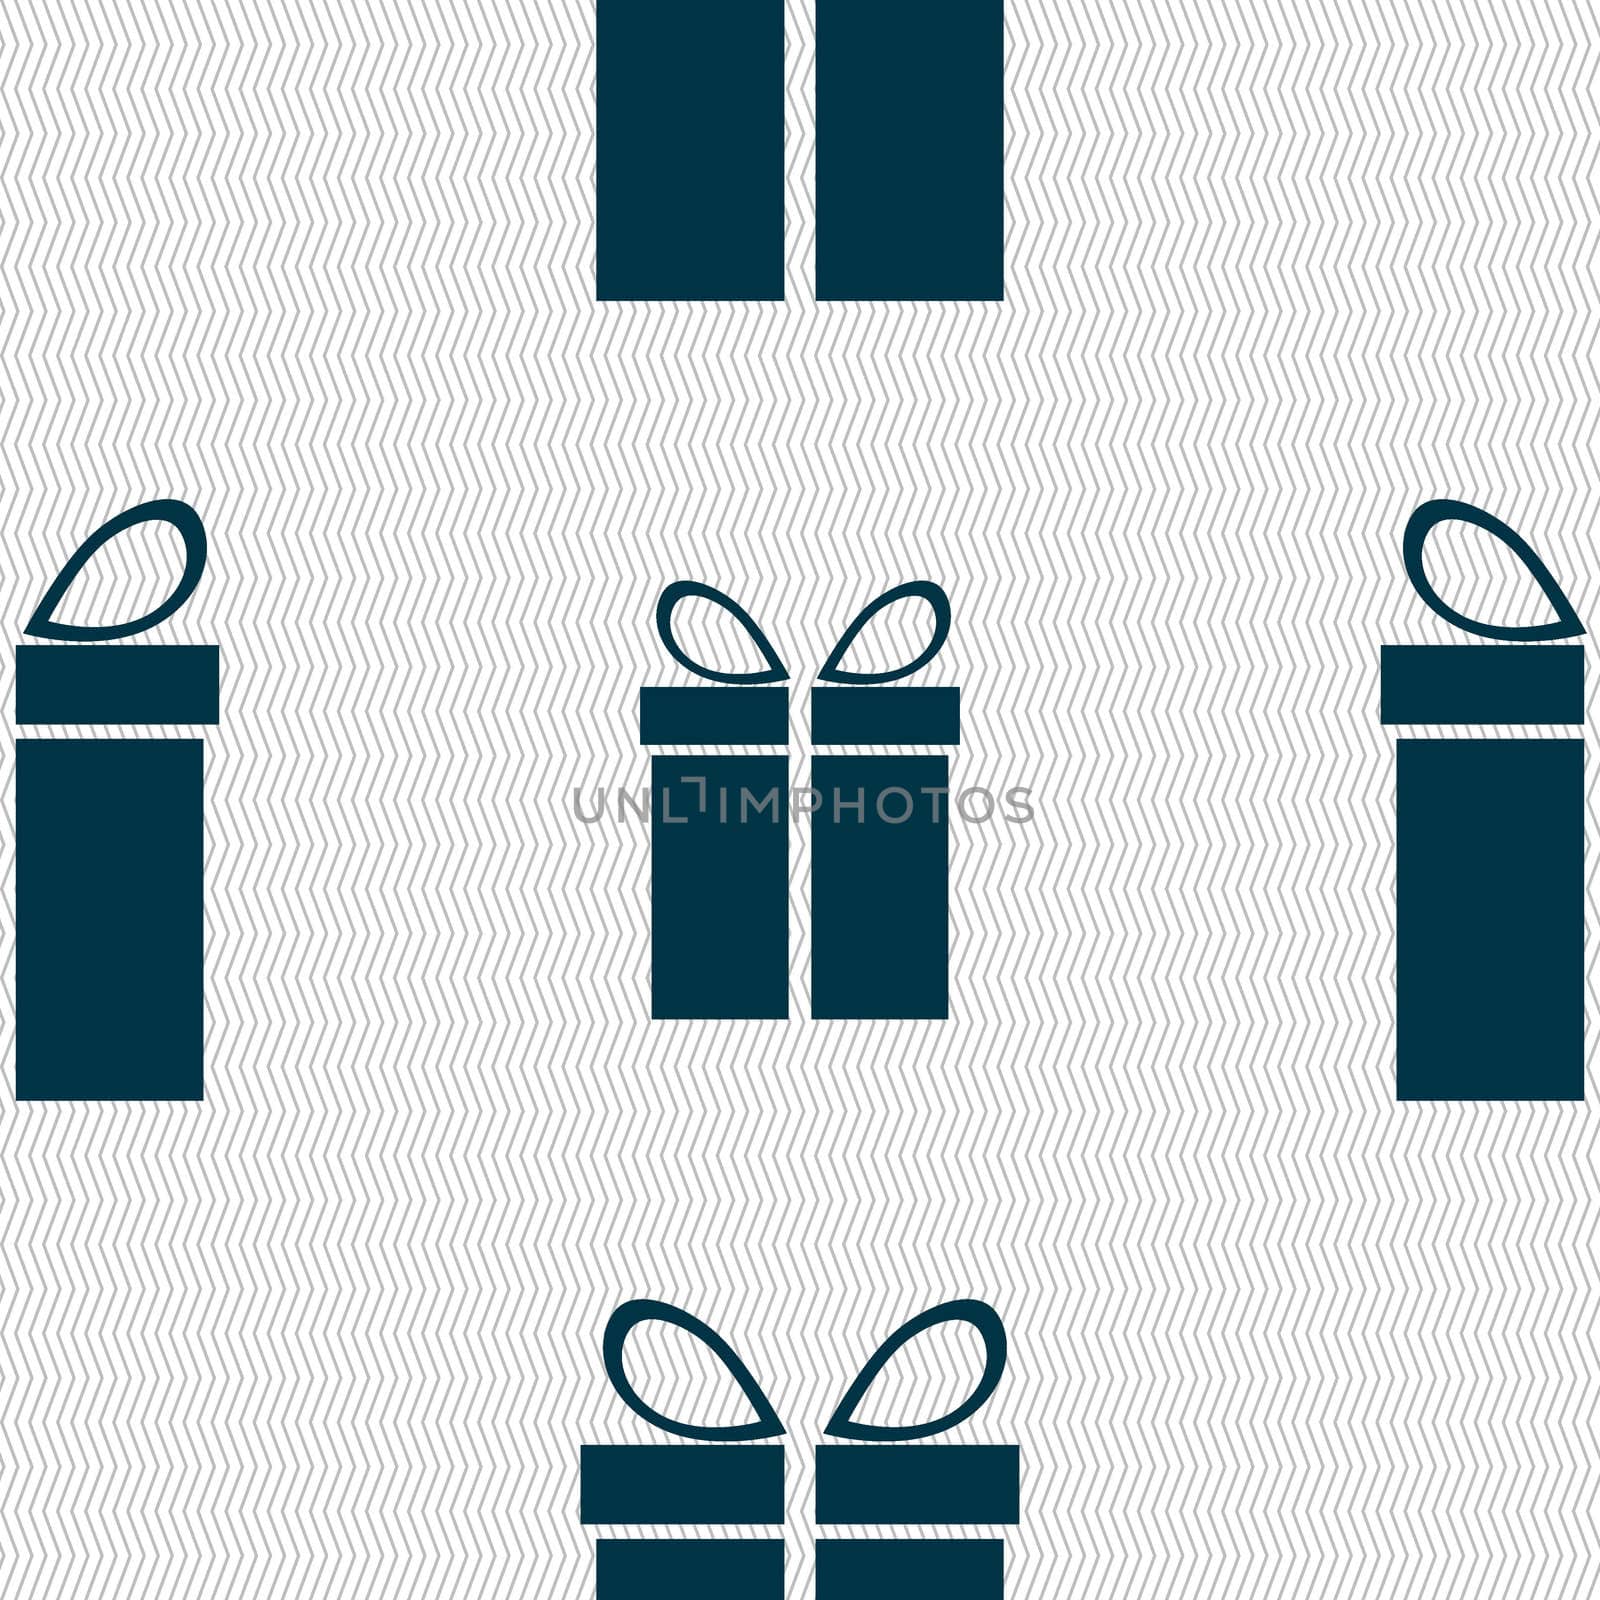 Gift box sign icon. Present symbol. Seamless abstract background with geometric shapes. illustration